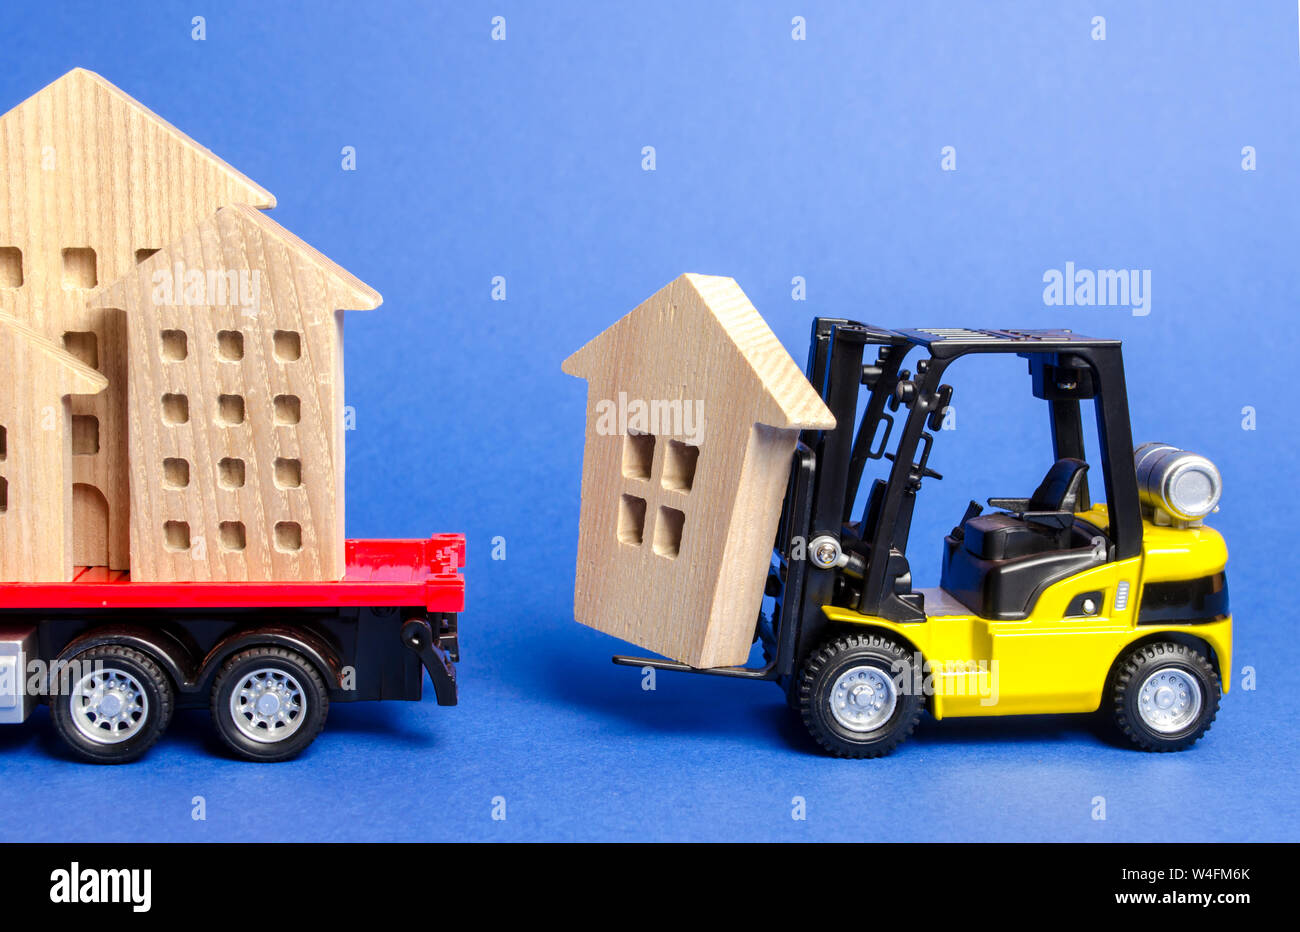 A yellow forklift loads a wooden figure of a house into a truck. Concept of transportation and cargo shipping, moving company. Construction of new hou Stock Photo